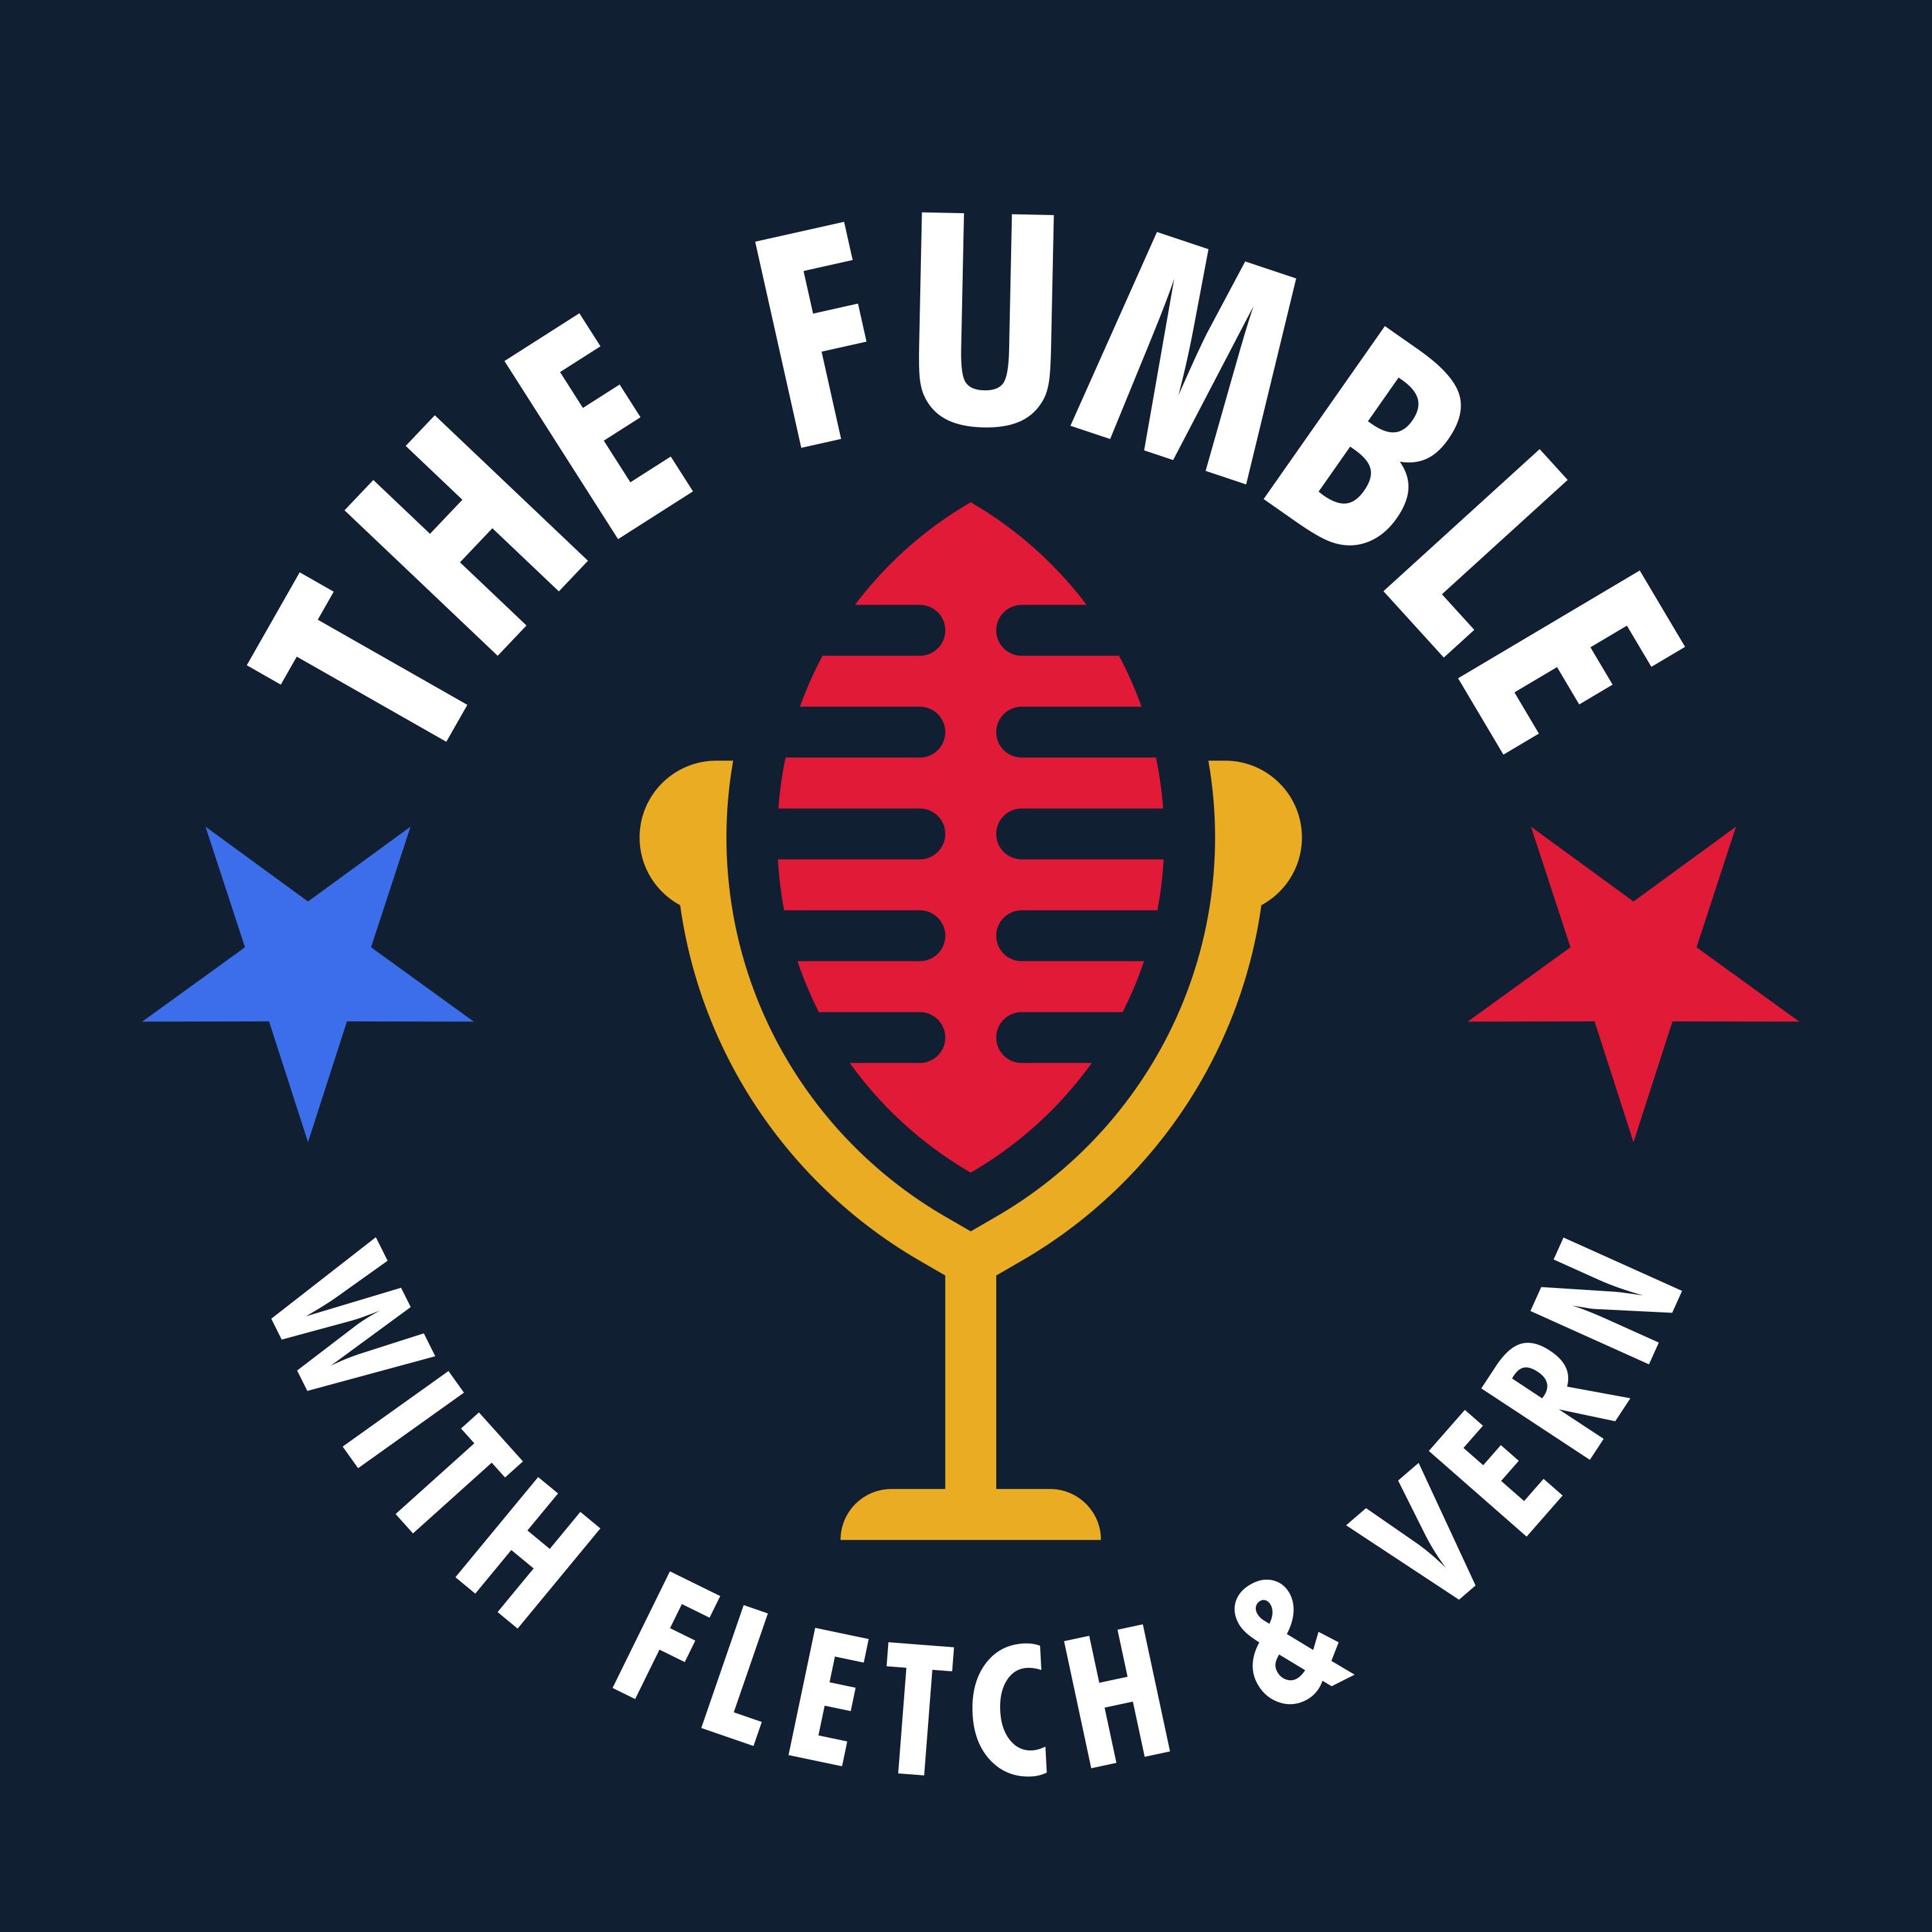 THE FUMBLE with FLETCH & VERN S4E3 NFL DRAFT PREVIEW & LOCKDOWN MERCH - Guest Matt Sherry of Gridiron Magazine